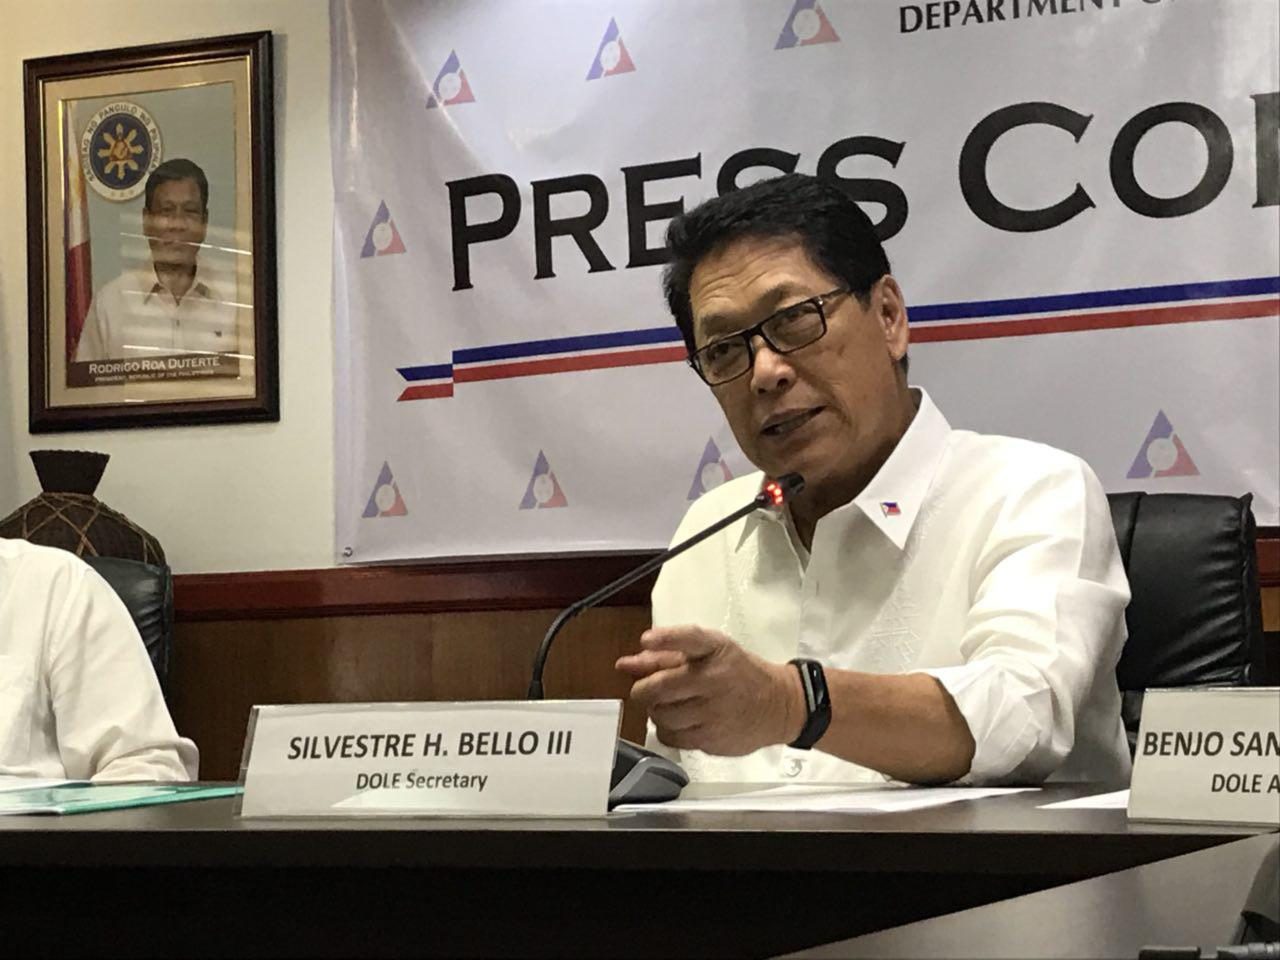 Jollibee, Dole, PLDT among top companies ‘engaged’ in illegal contracting